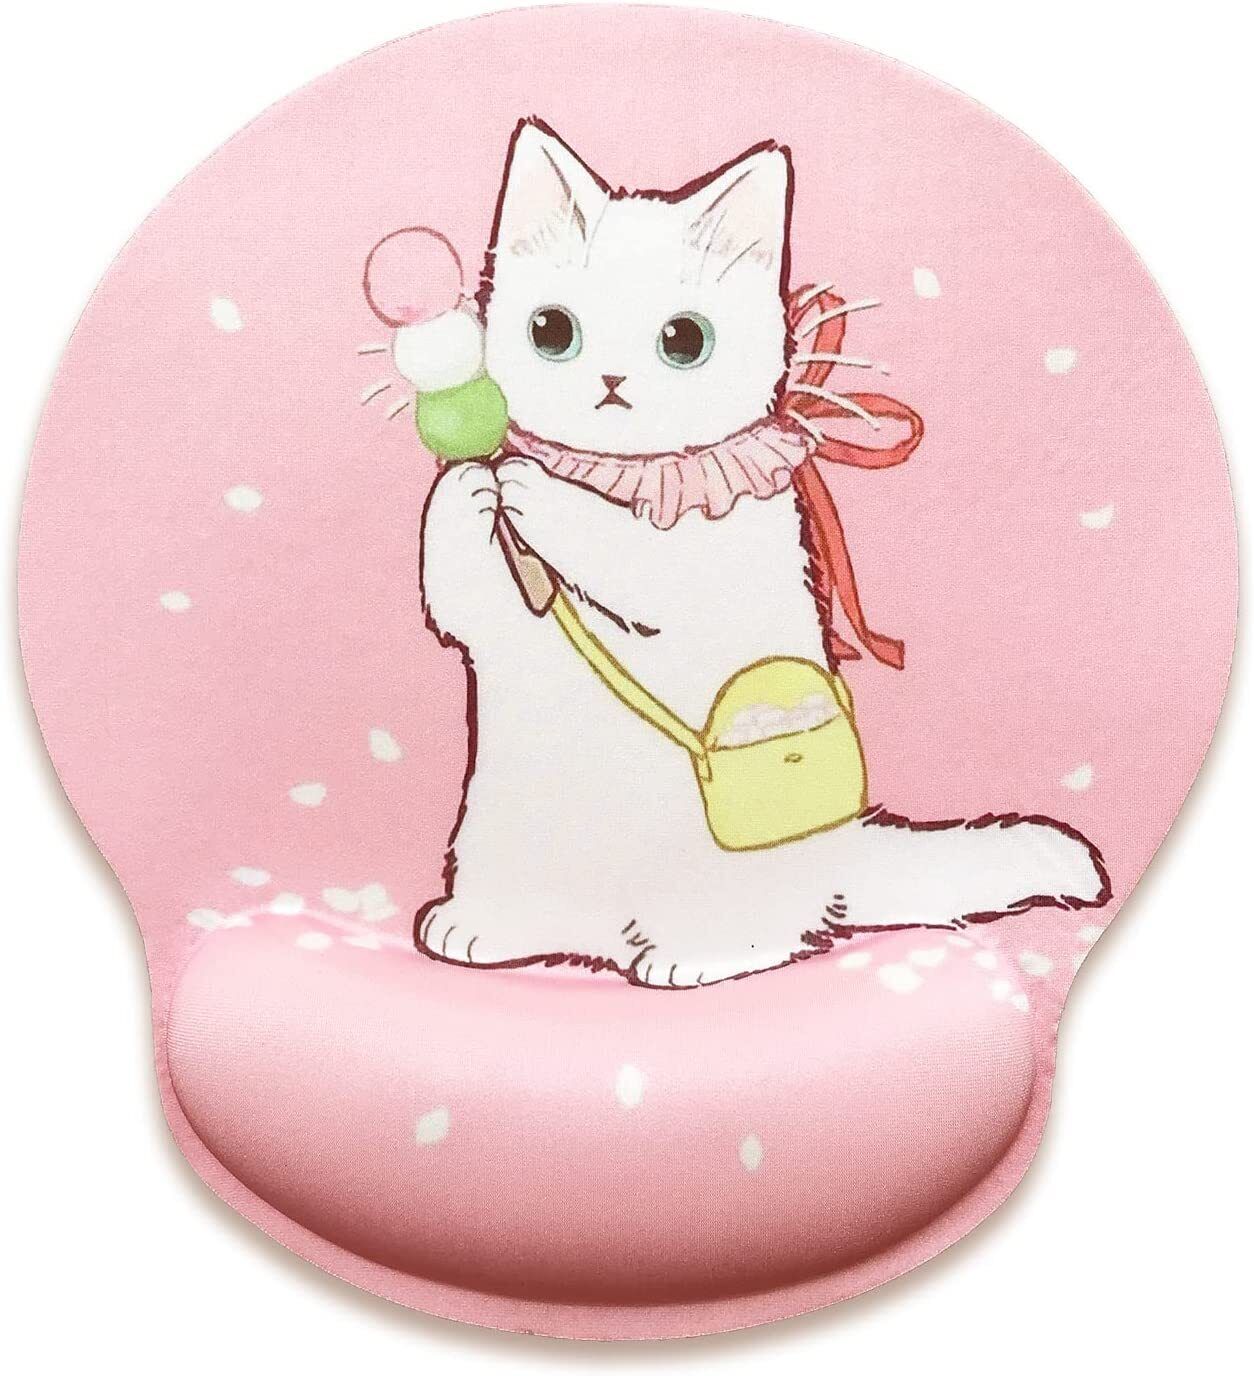 Cat Mousepad Wrist Support with Memory Foam, Pink Kawaii Cute Mouse Pads 